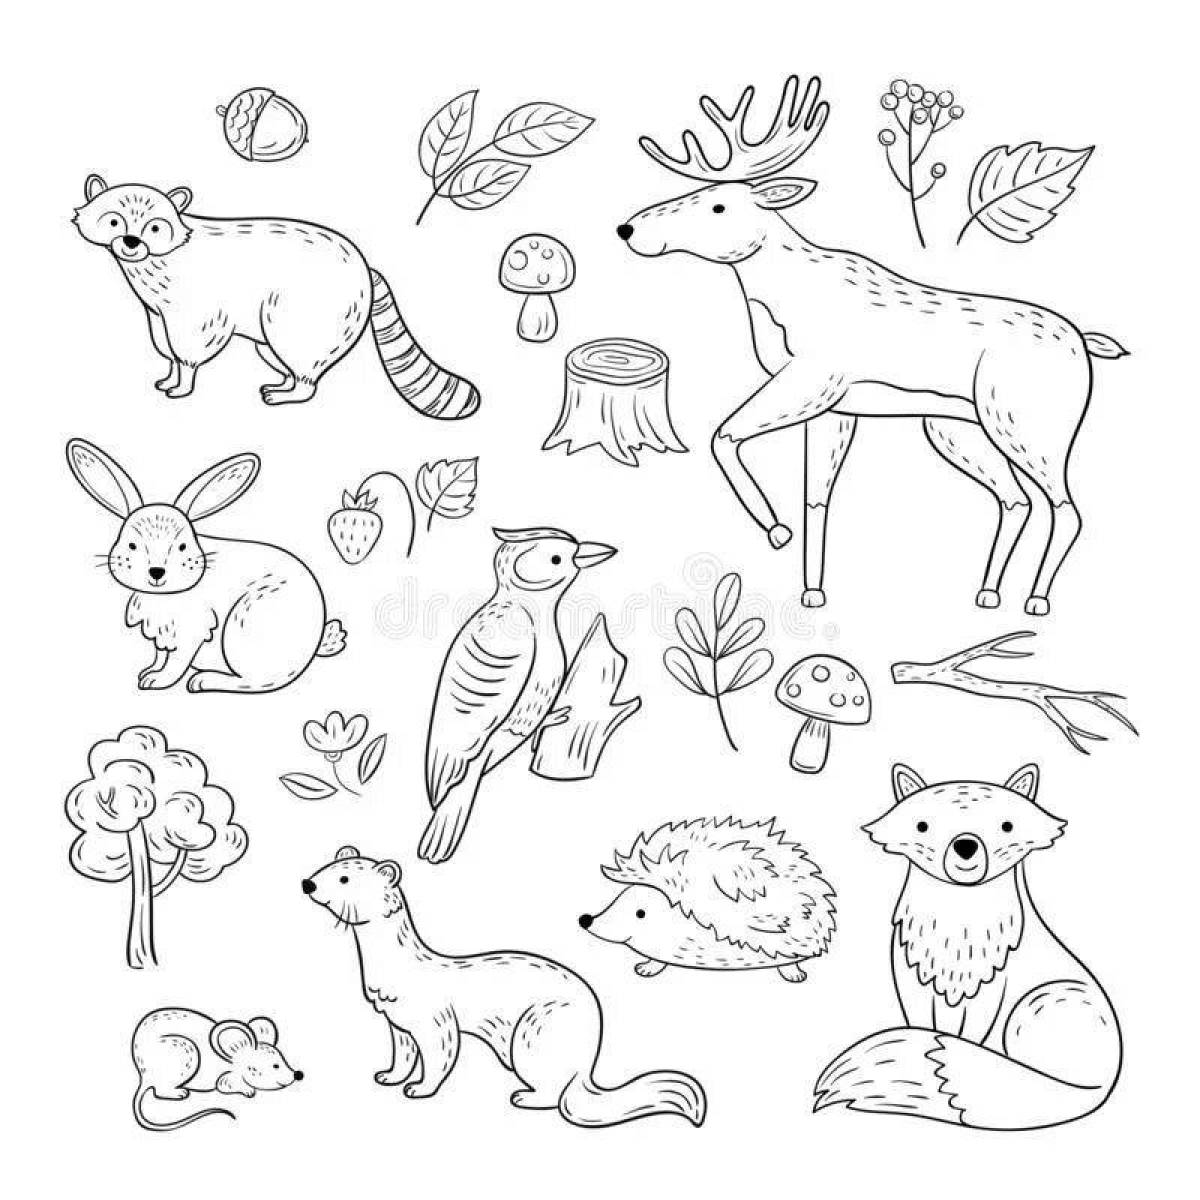 Colorful forest animal coloring page